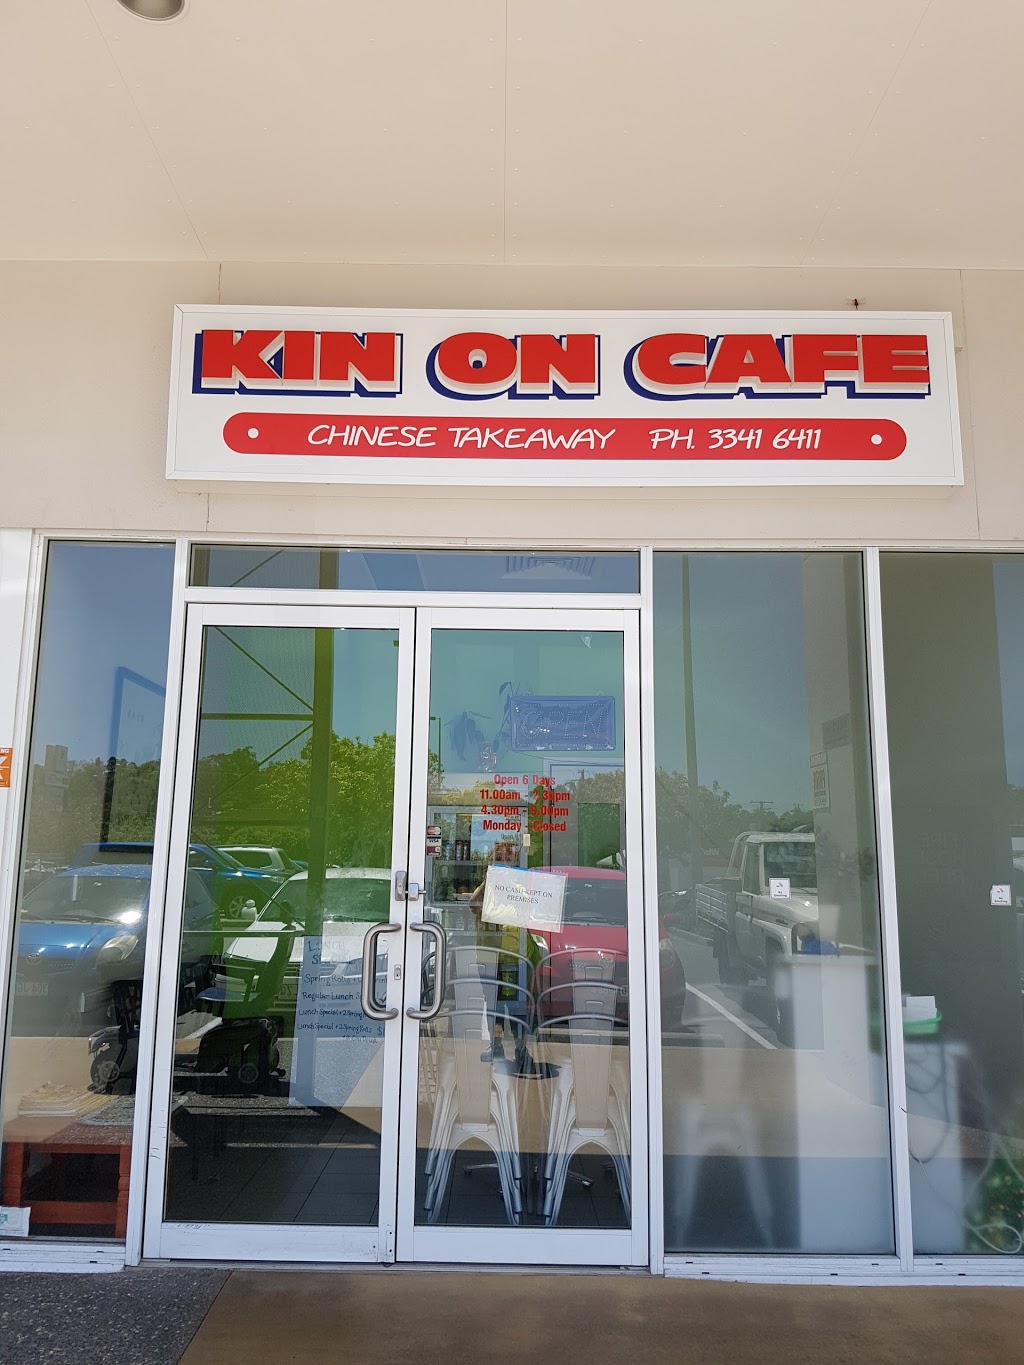 Kinon Chinese Takeaway | 22/549 Underwood Rd, Rochedale South QLD 4112, Australia | Phone: (07) 3341 6411